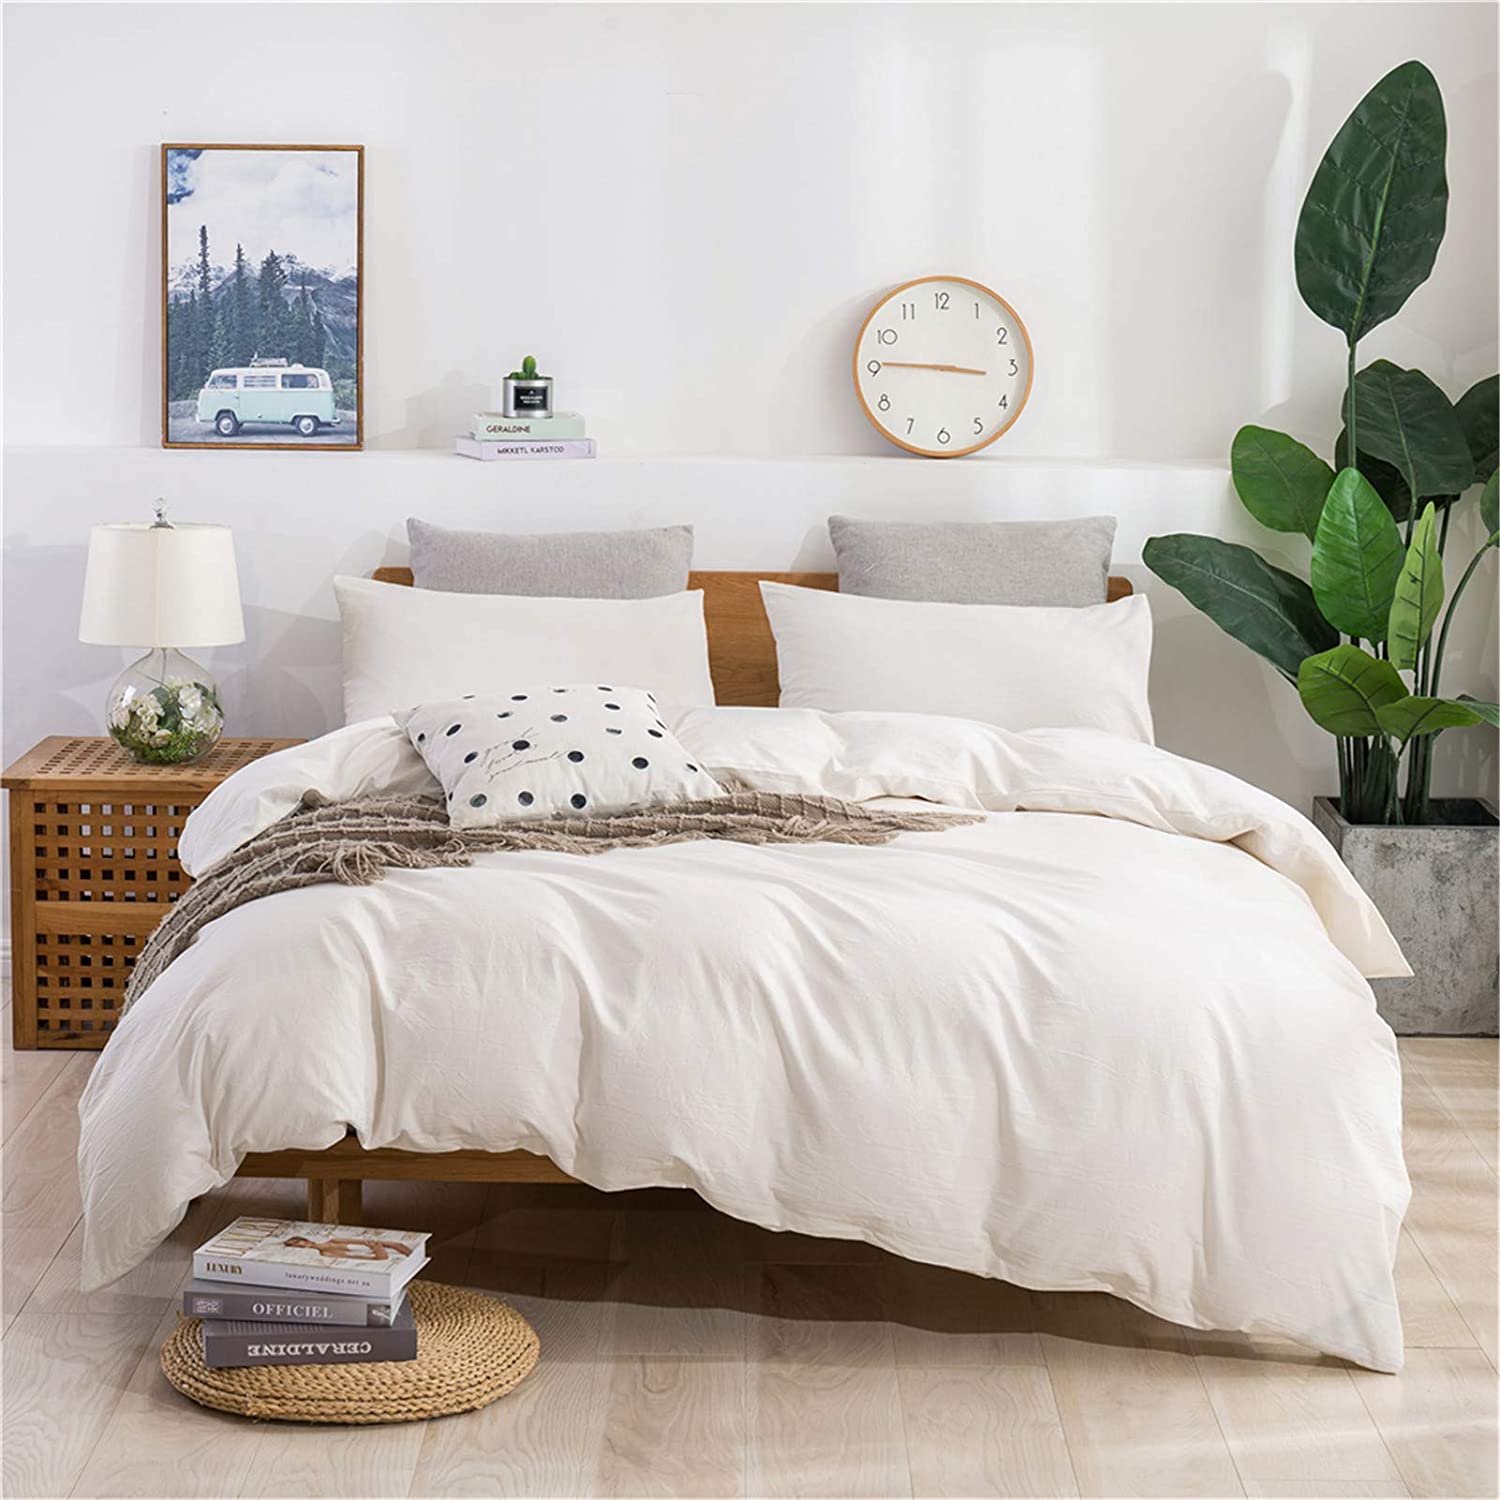 Price:$49.99  Washed Cotton Duvet Cover Queen Ultra Soft 100% Cotton Solid White Duvet Cover Set with Zipper Closure -3 Pieces White Queen : Home & Kitchen